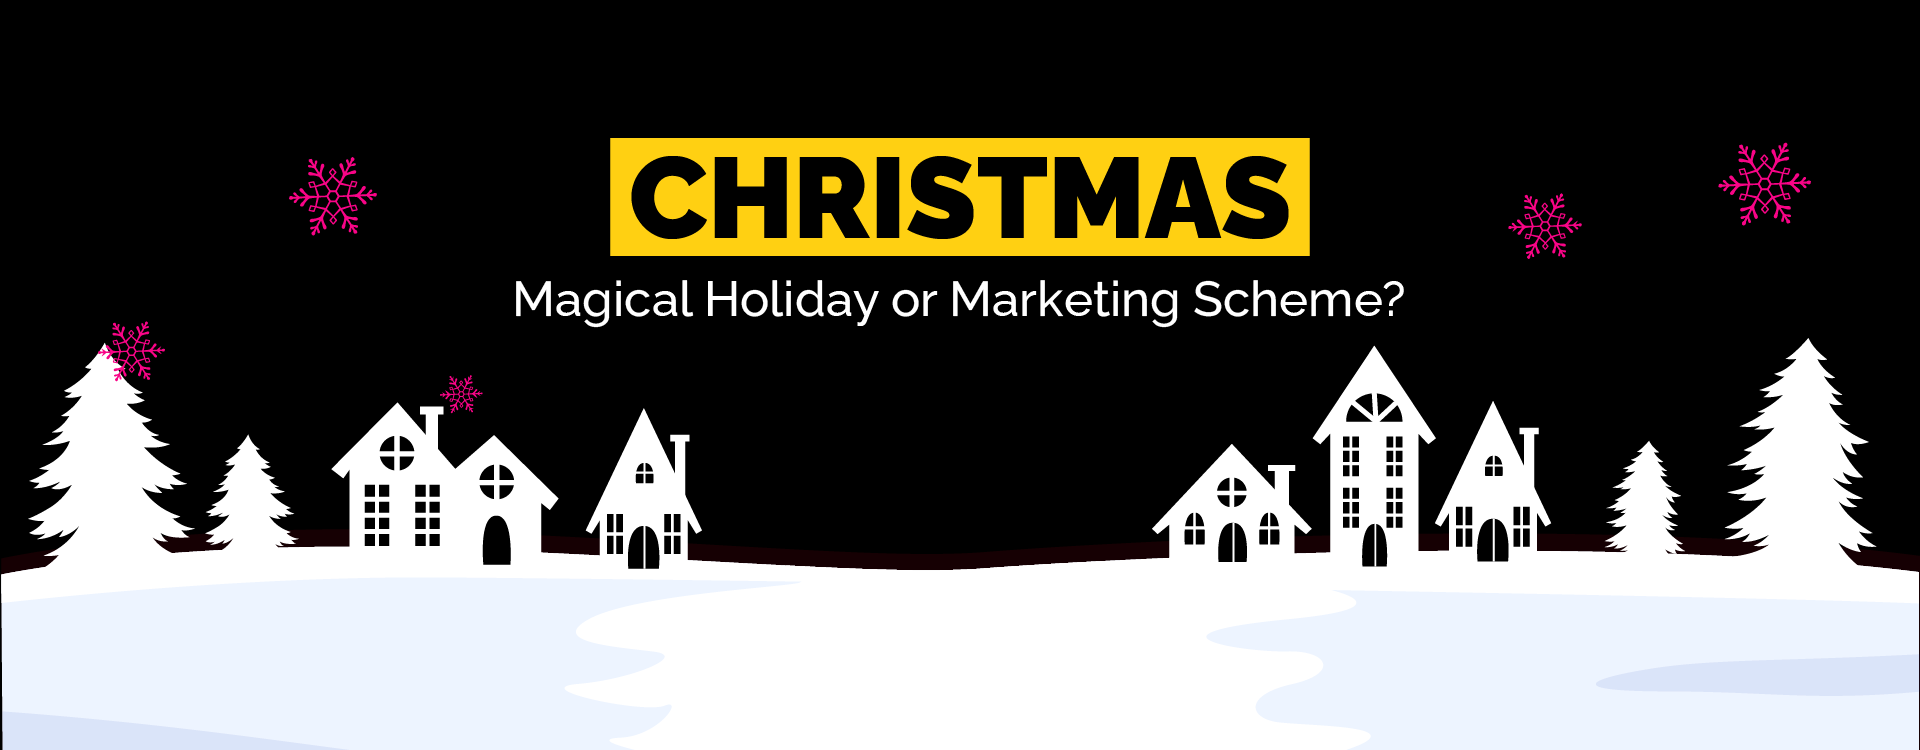 Christmas: Magical Holiday or Marketing Scheme?